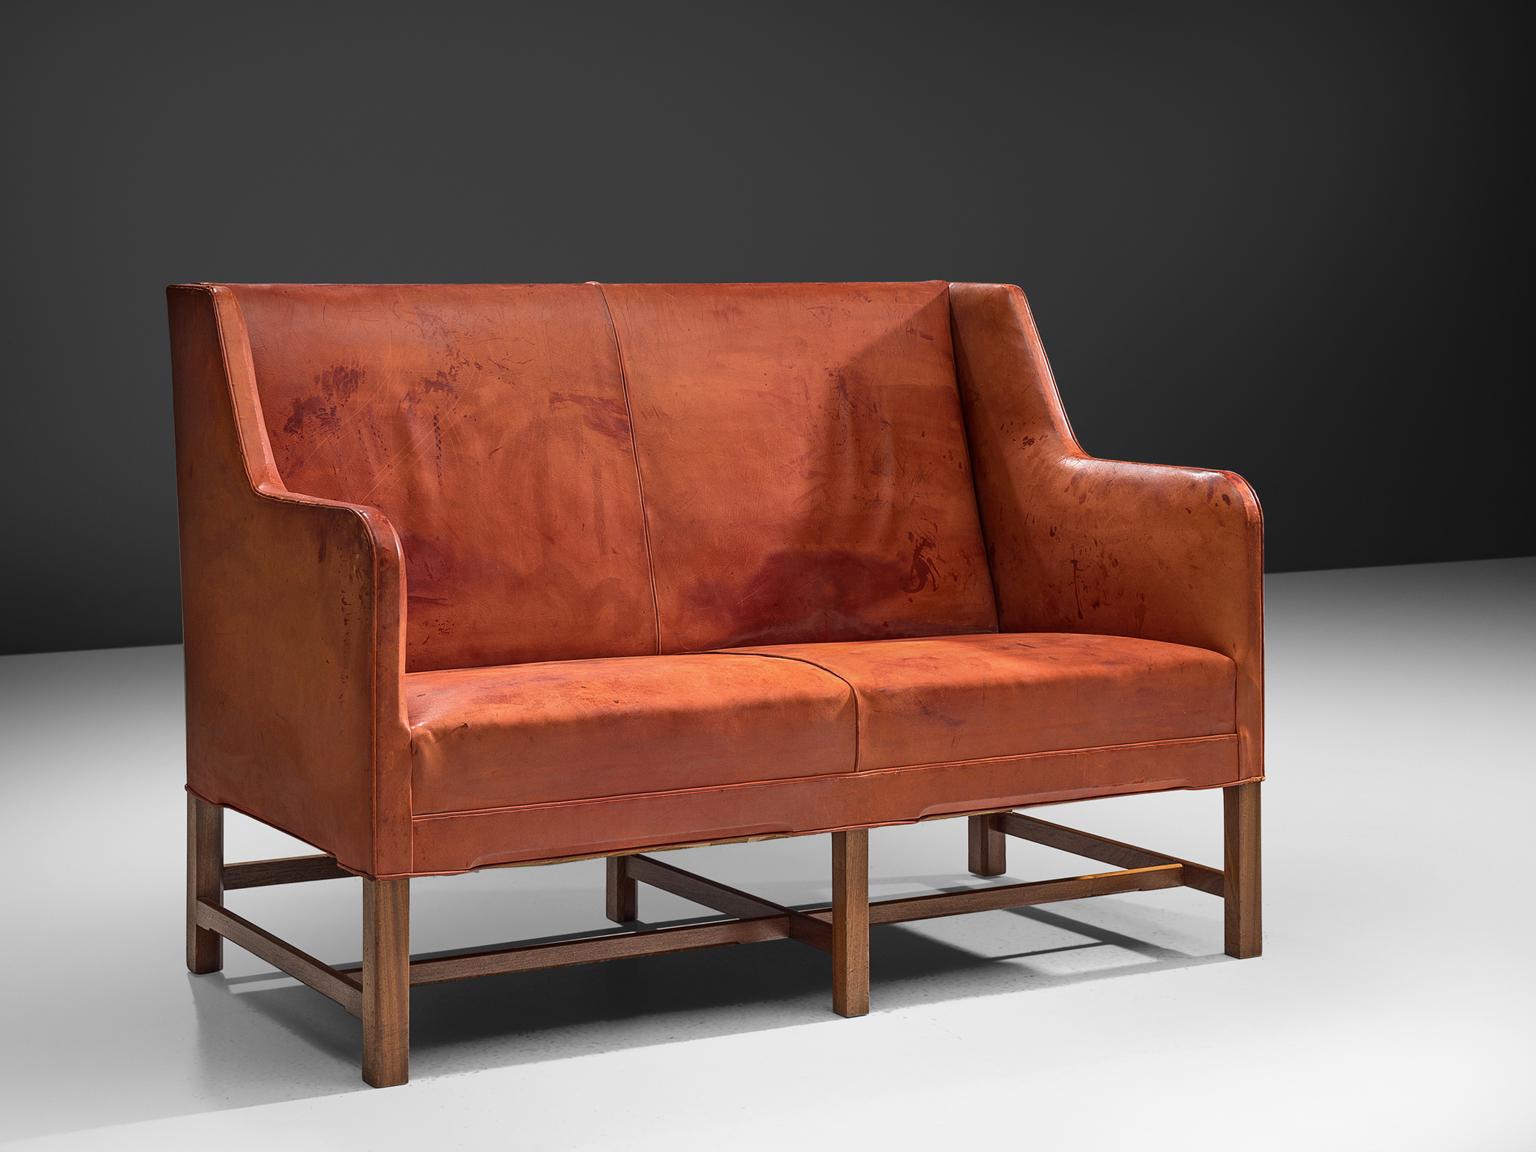 Kaare Klint for Rud Rasmussen two-seat settee, in red cognac leather and teak legs, Denmark, 1930s.

Classic and elegant Scandinavian custom made two-seat settee by Kaare Klint for manufacturer Rud Rasmussen. The piece is upholstered with patinated